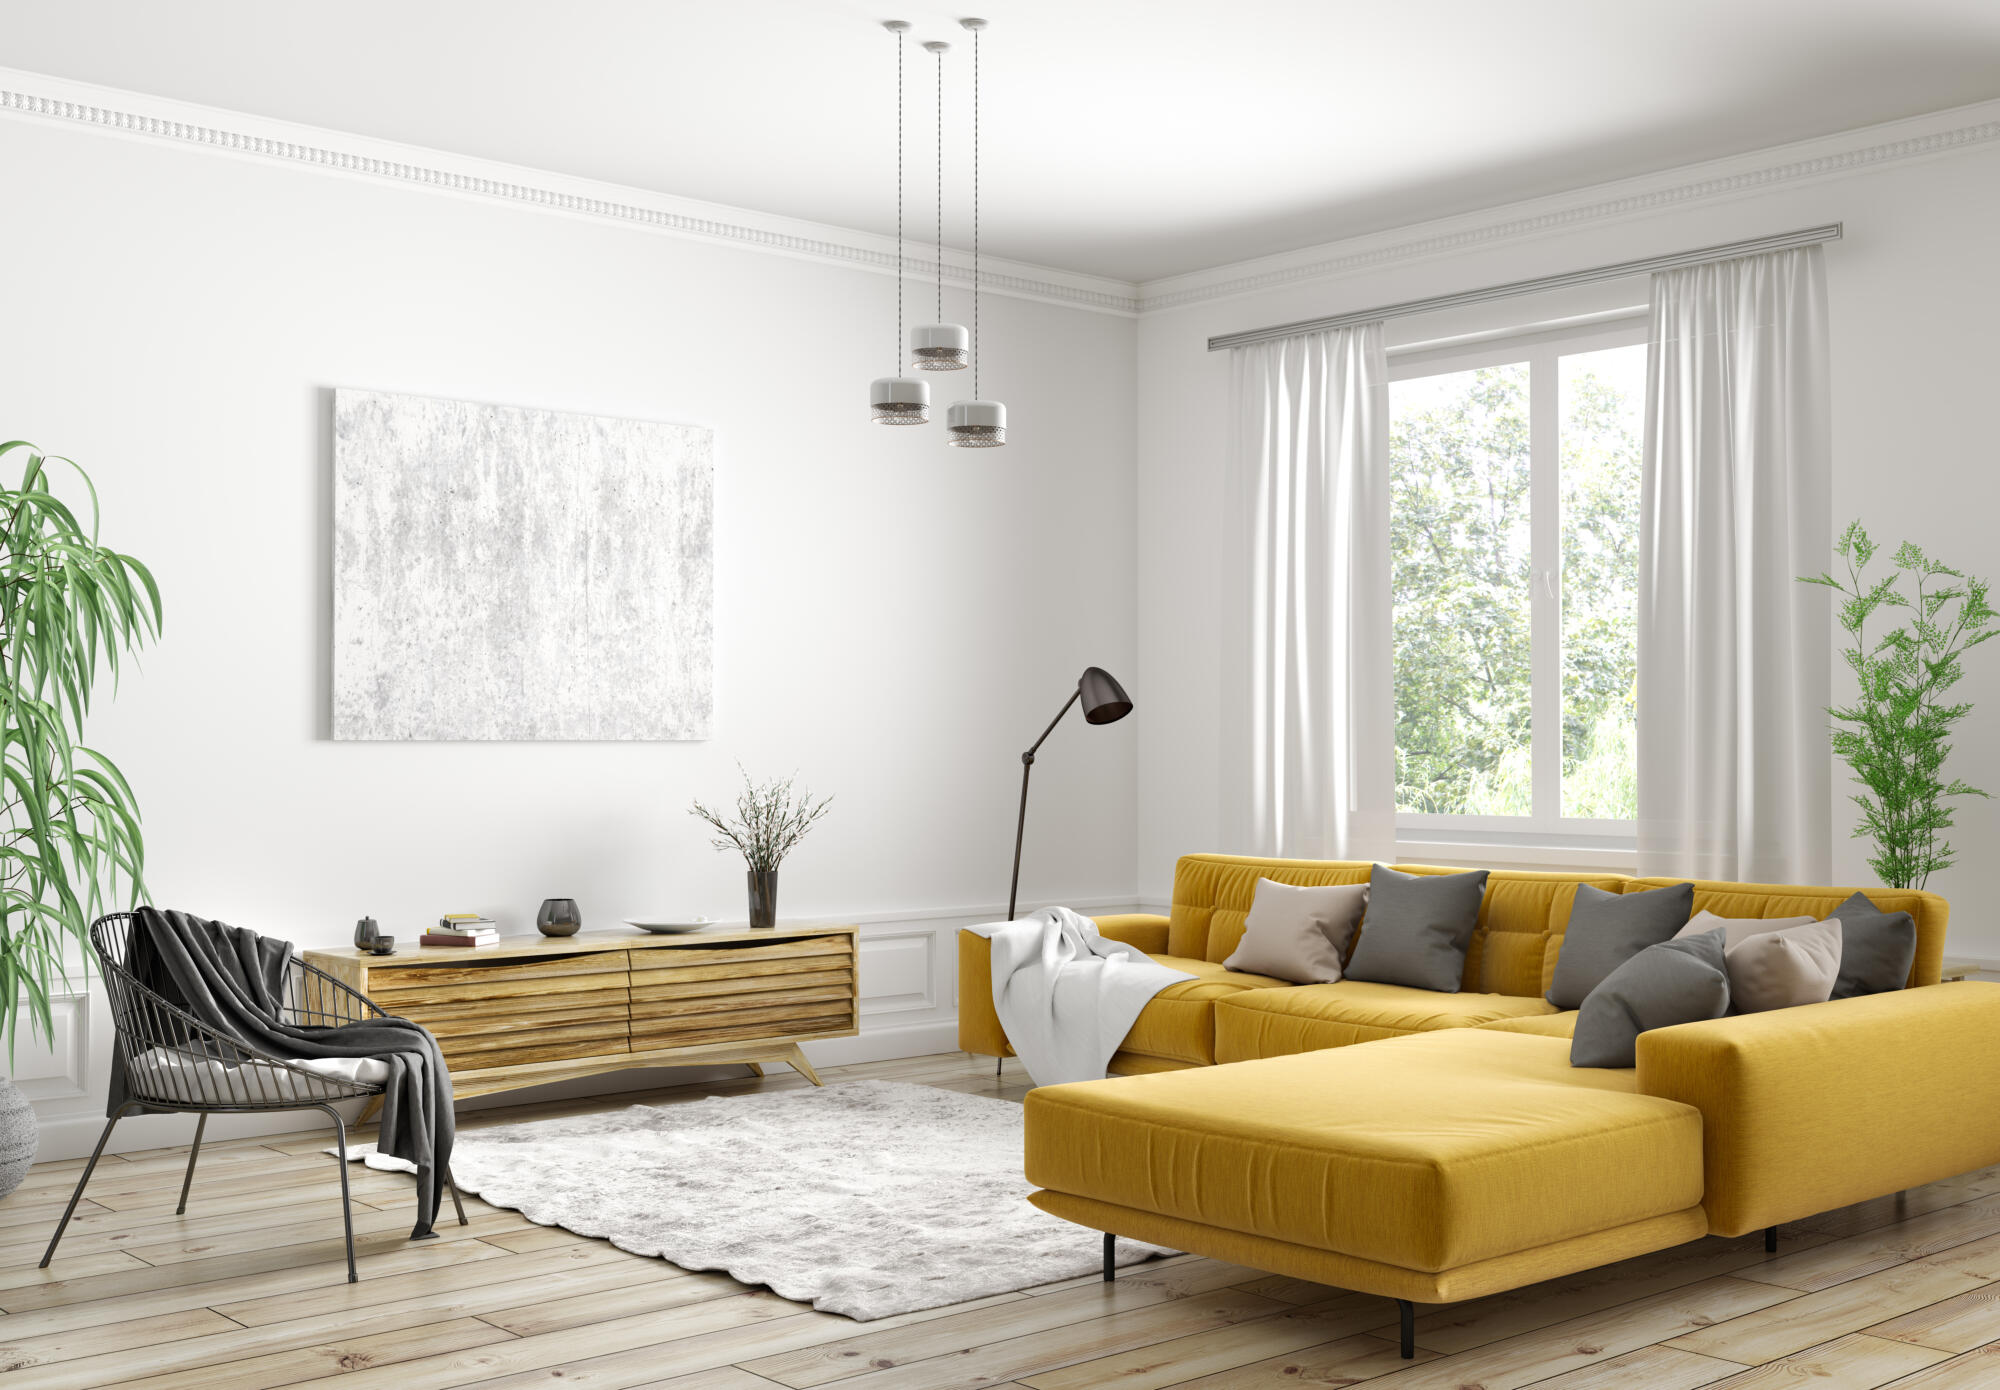 A yellow living room with wooden floors and a yellow sofa, creating a Scandinavian modern look for your home.